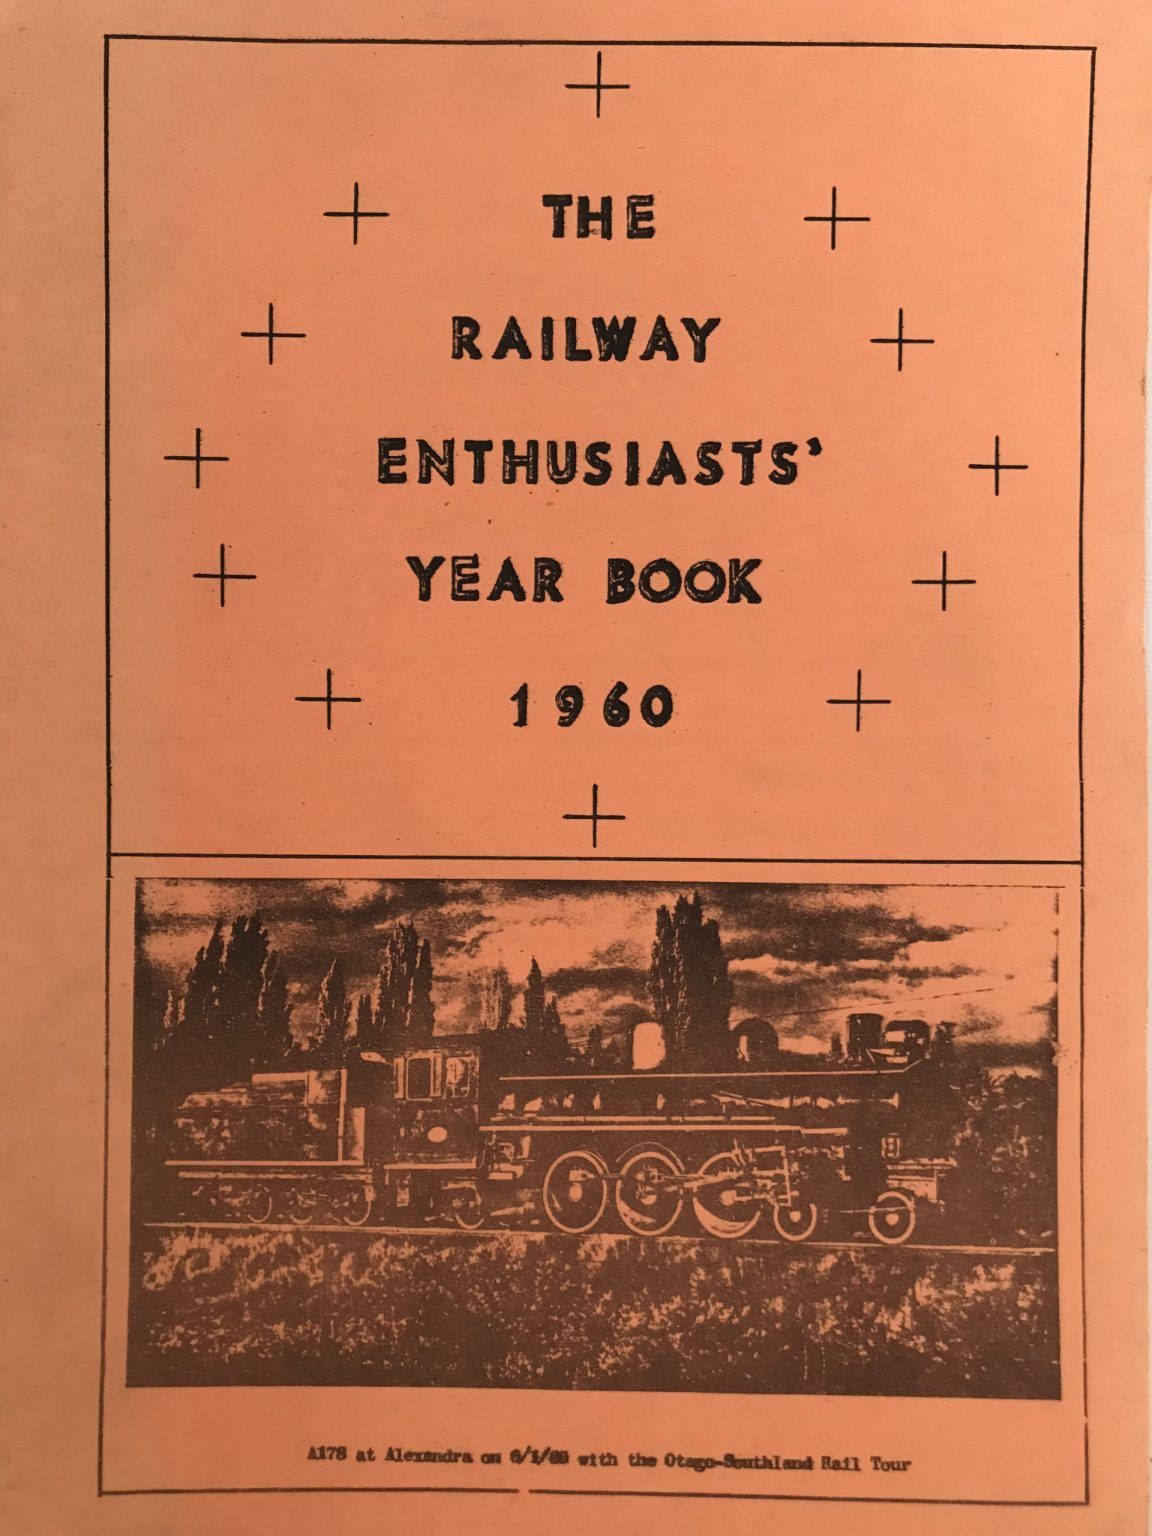 THE RAILWAY ENTHUSIASTS' YEARBOOK 1960